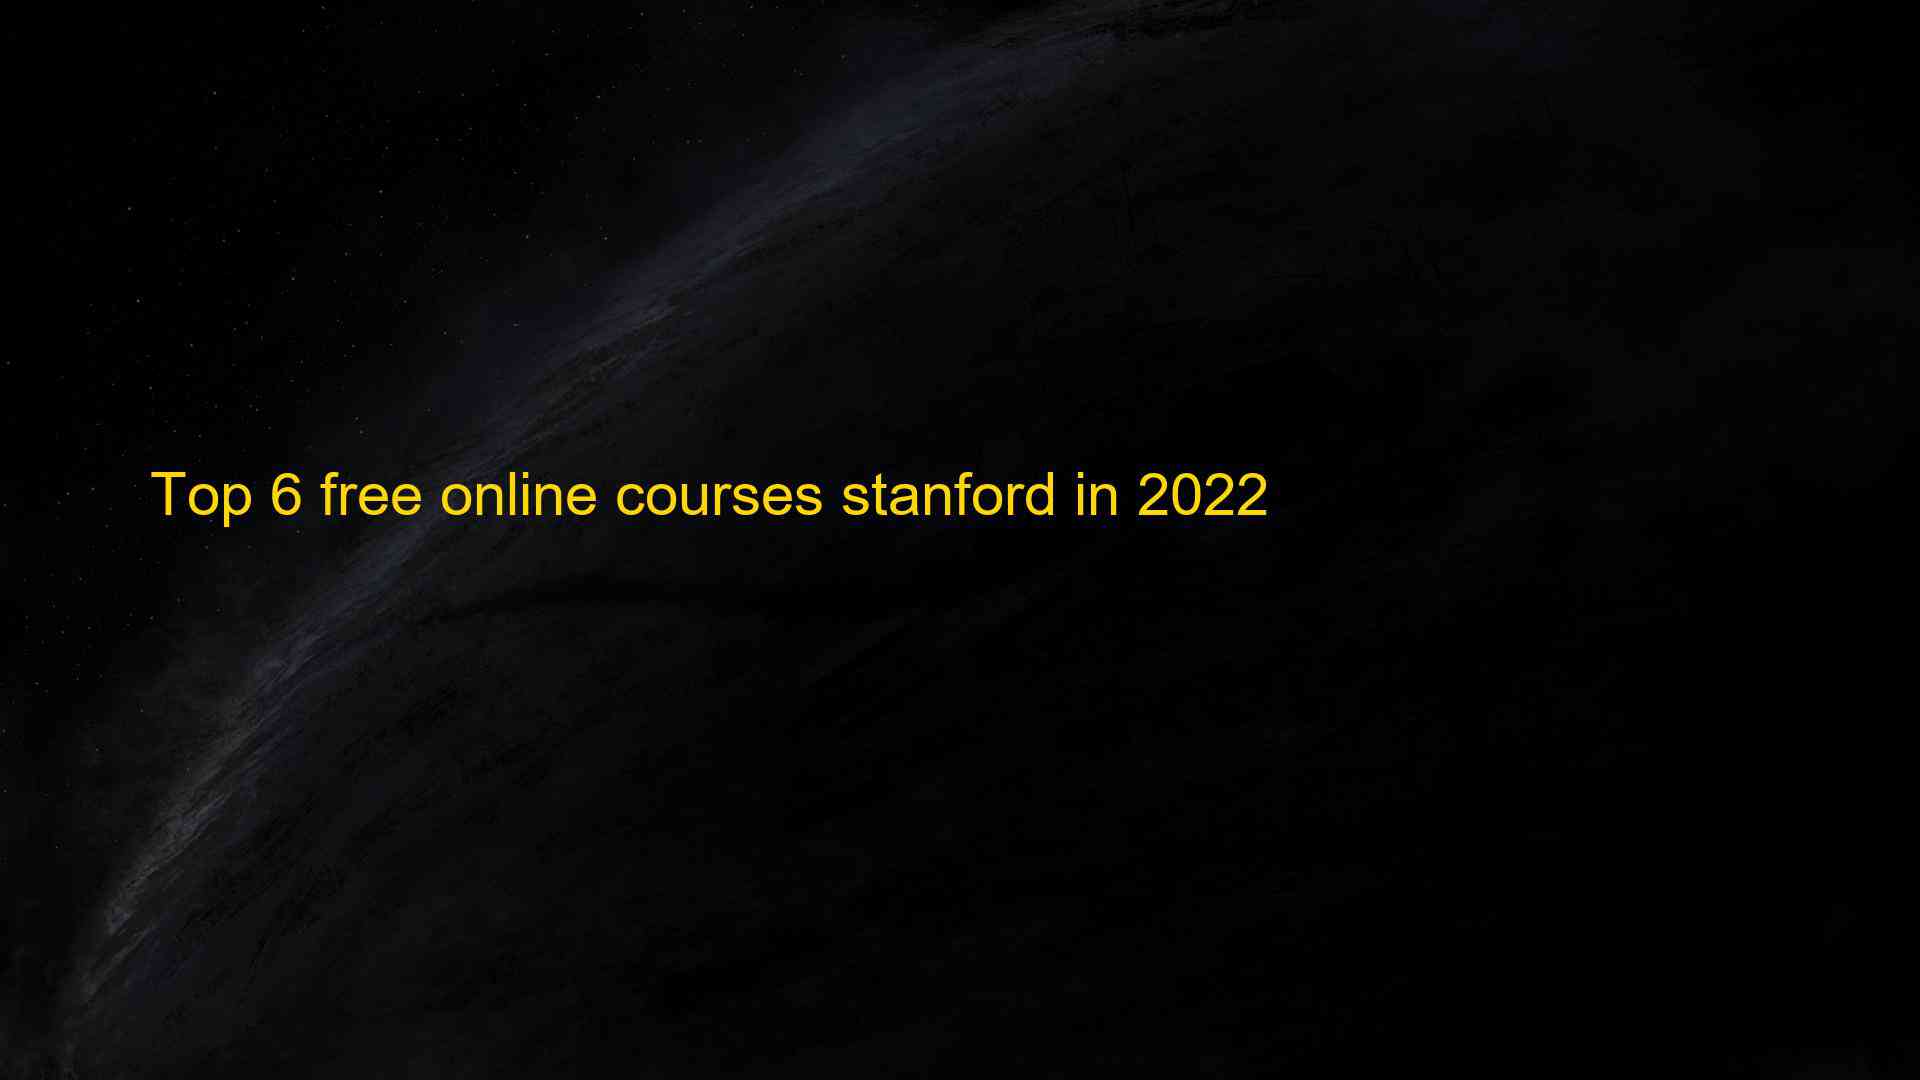 Top 6 free online courses stanford in 2022 1660879910